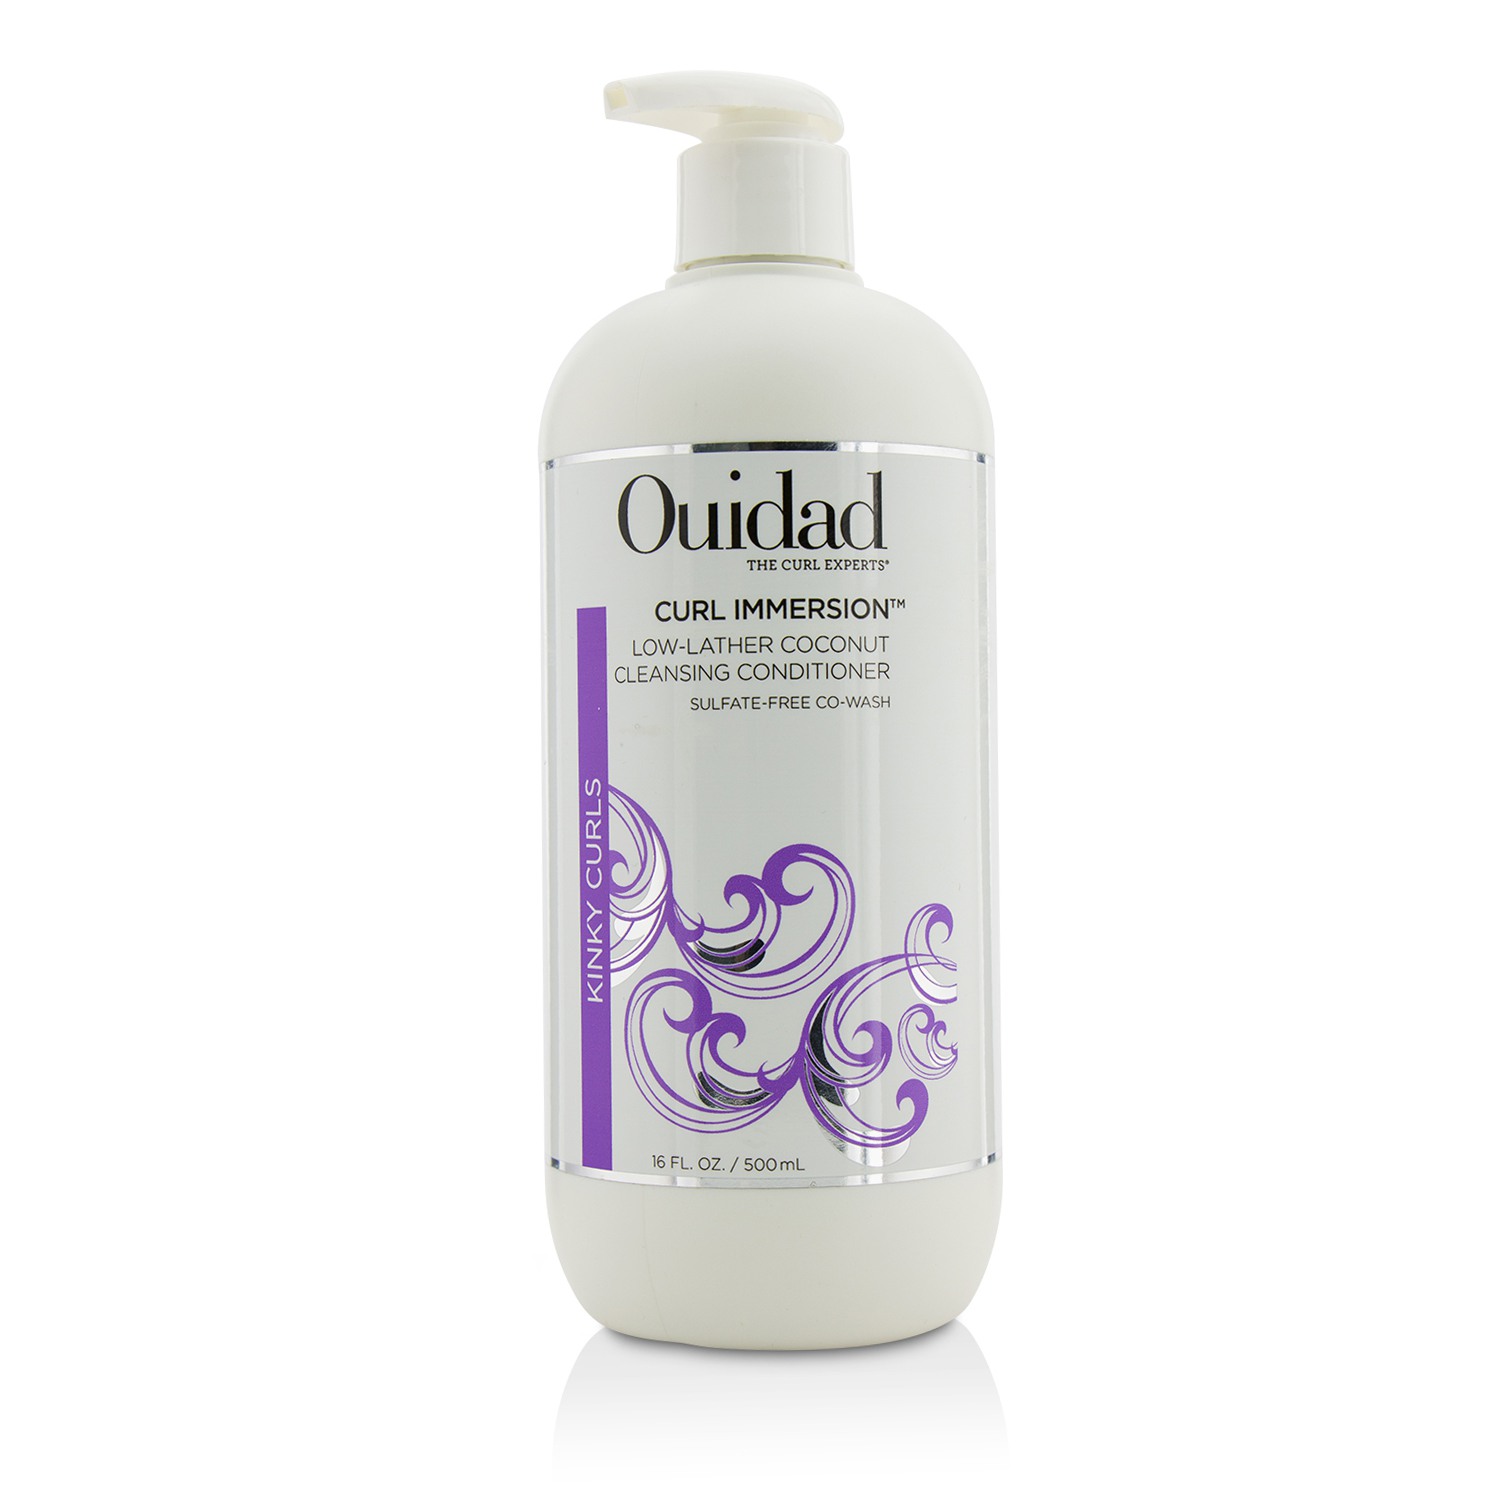 Curl Immersion Low-Lather Coconut Cleansing Conditioner (Kinky Curls) Ouidad Image